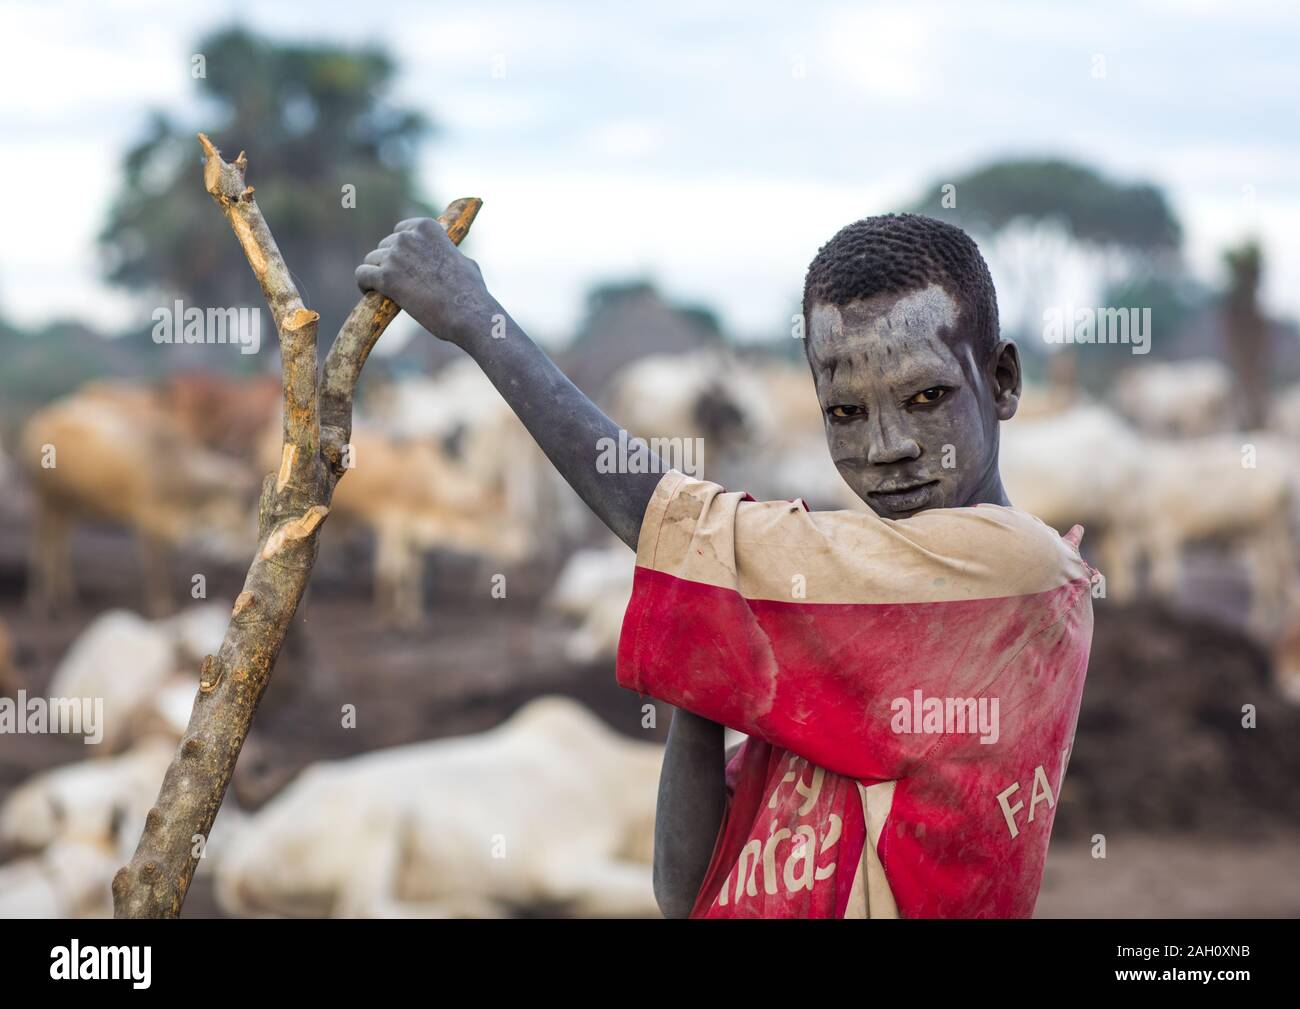 Mundari tribe boy covered in ash to protect from the mosquitoes and flies, Central Equatoria, Terekeka, South Sudan Stock Photo